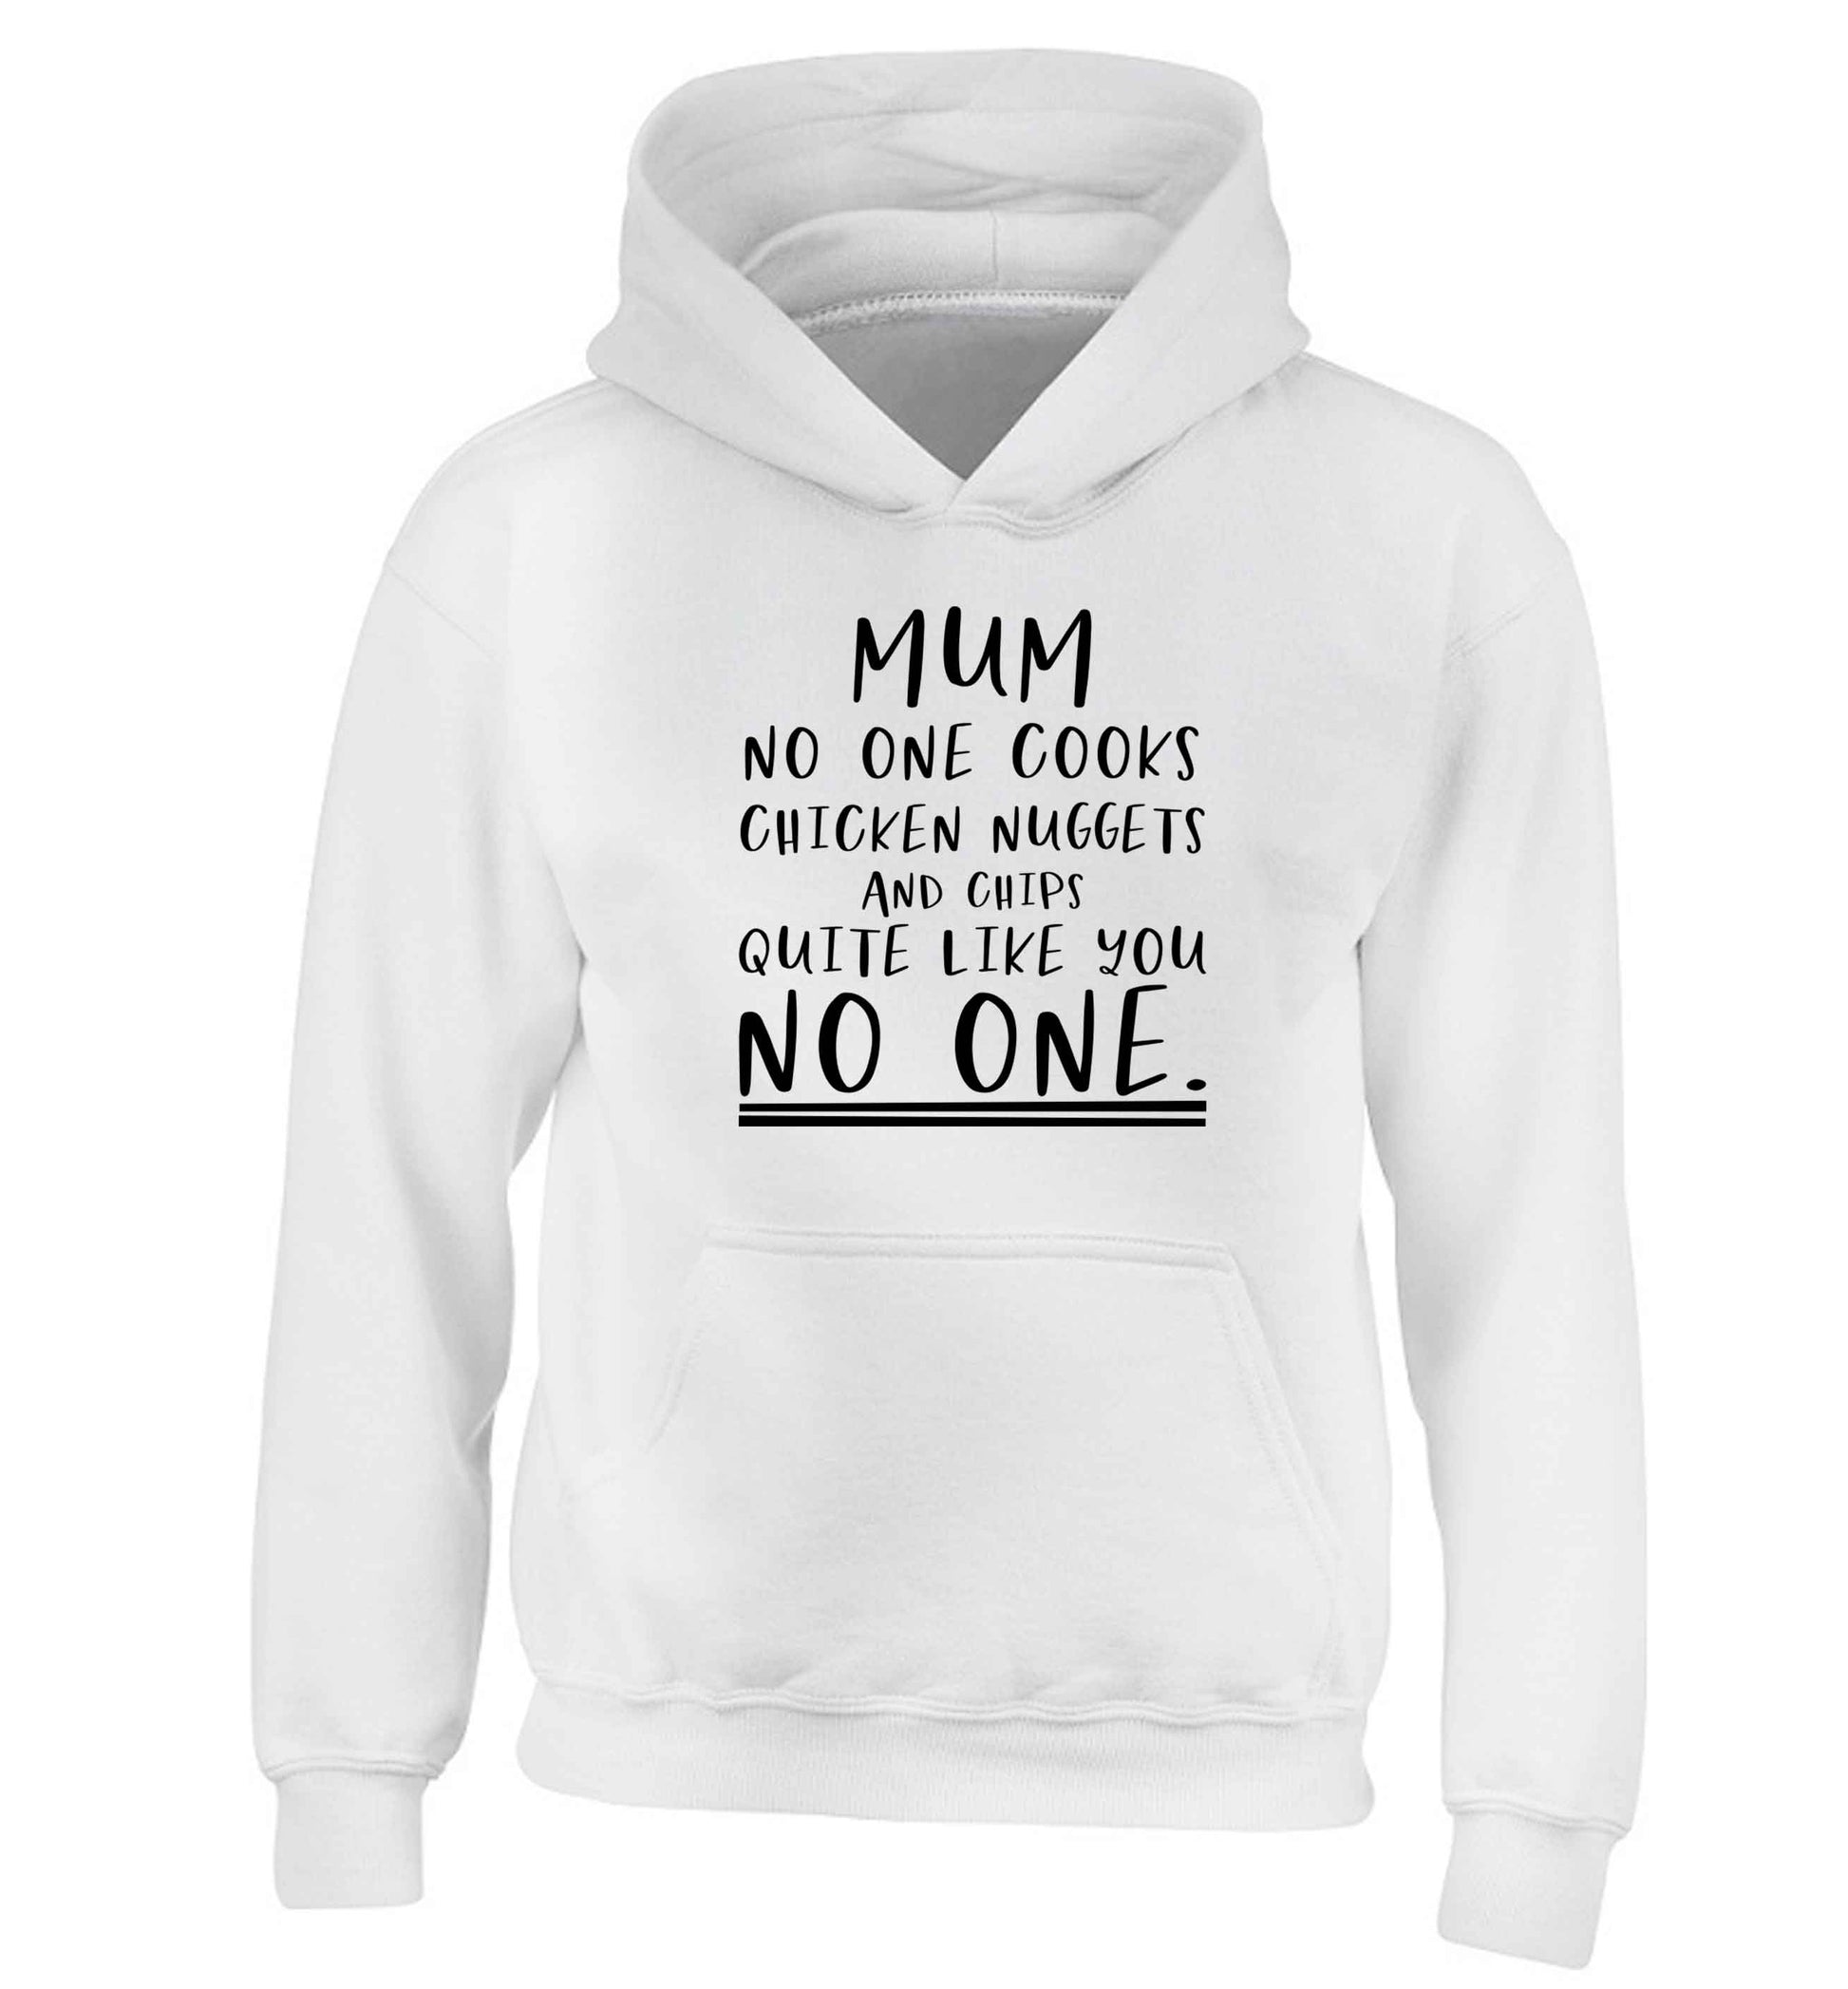 Super funny sassy gift for mother's day or birthday!  Mum no one cooks chicken nuggets and chips like you no one children's white hoodie 12-13 Years